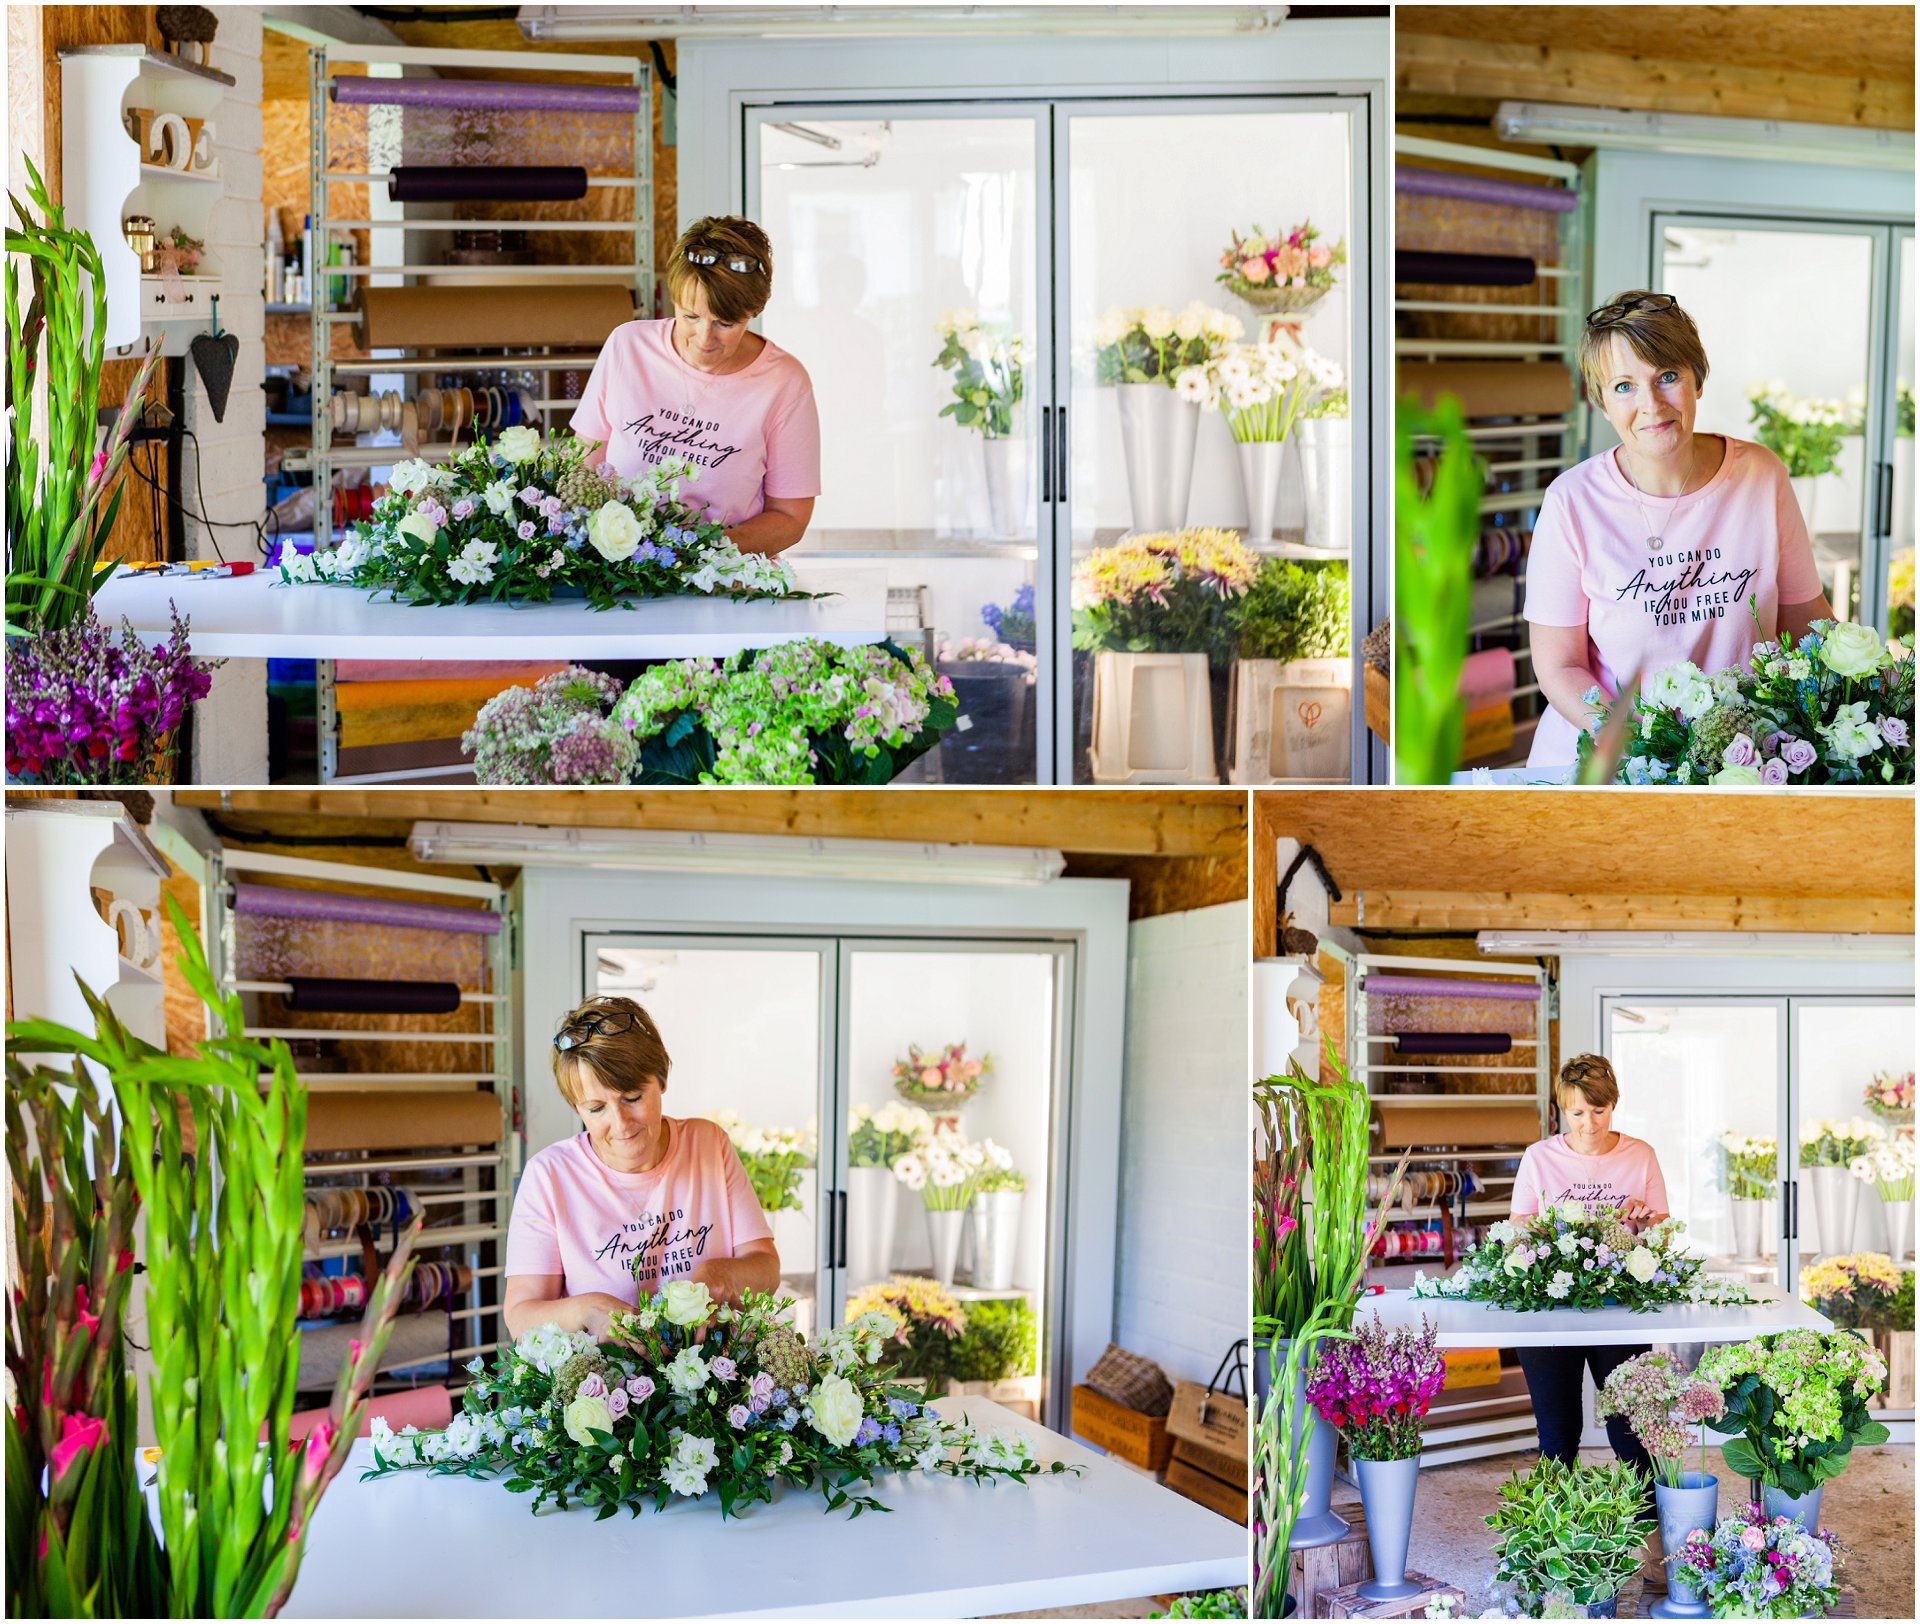 A brand shoot with florist Blooms by Julie creating a funeral spray arrangement. Images by London brand photographer AKP Branding Stories